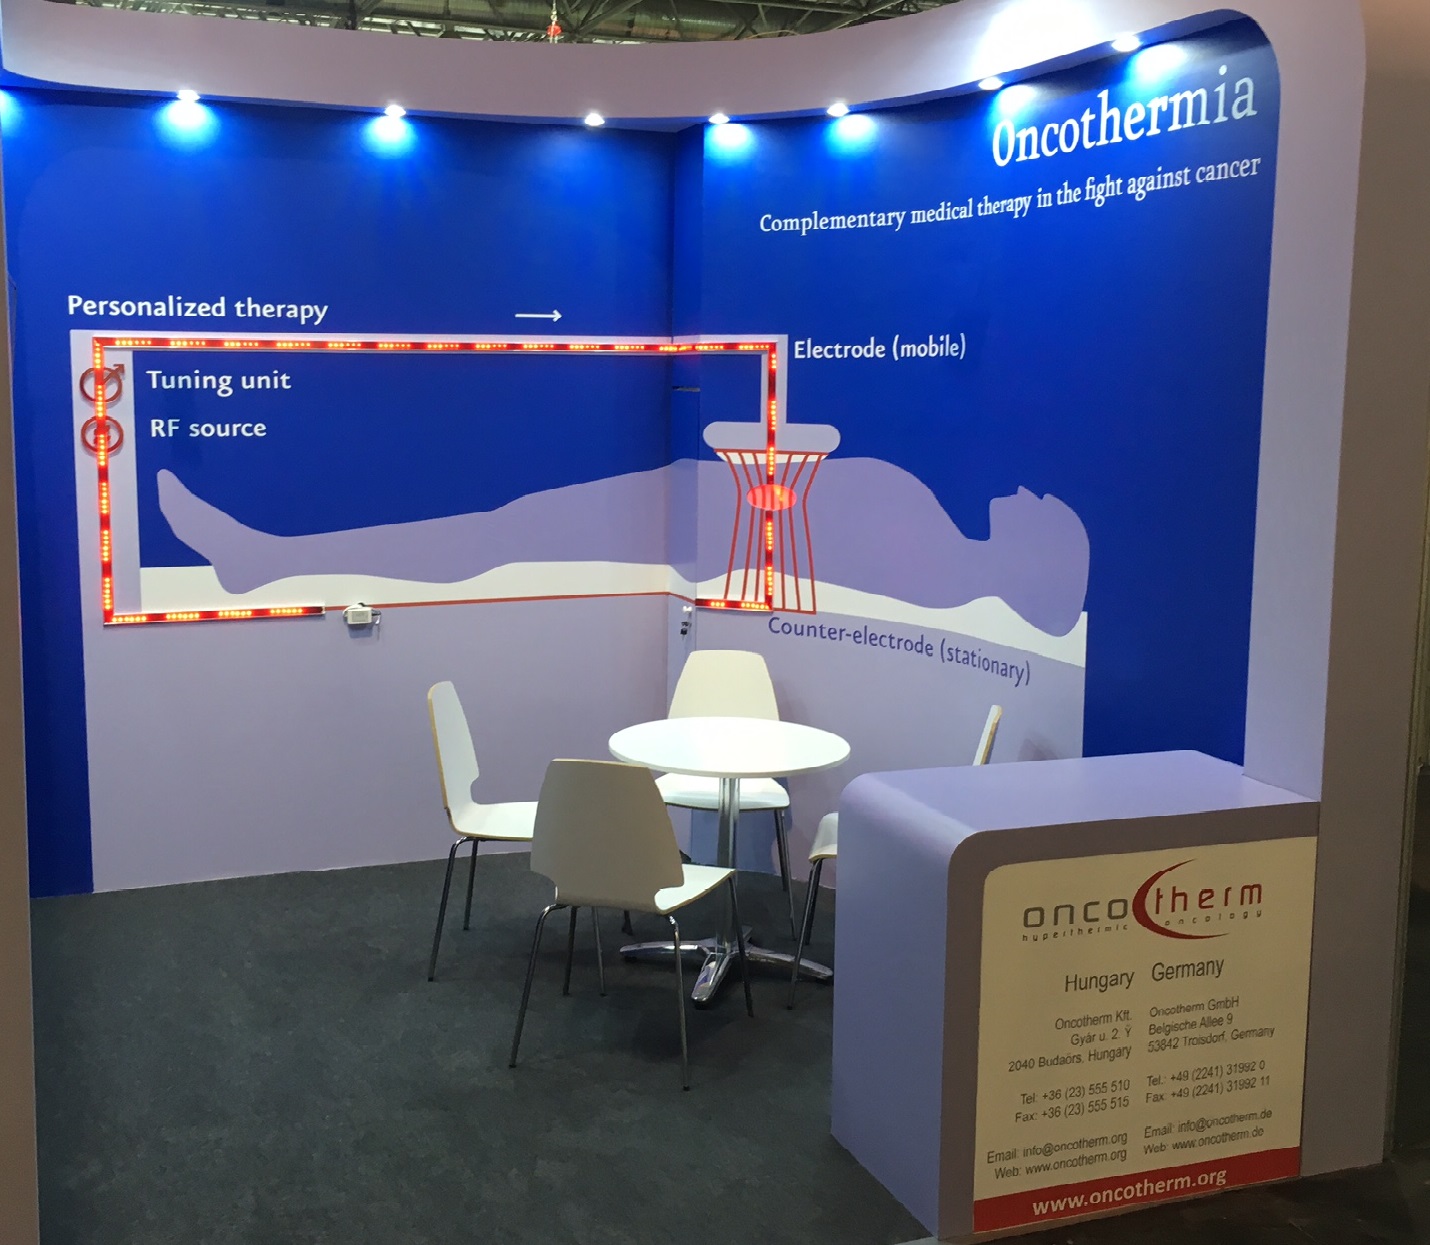 Booth of Oncotherm at ESTRO